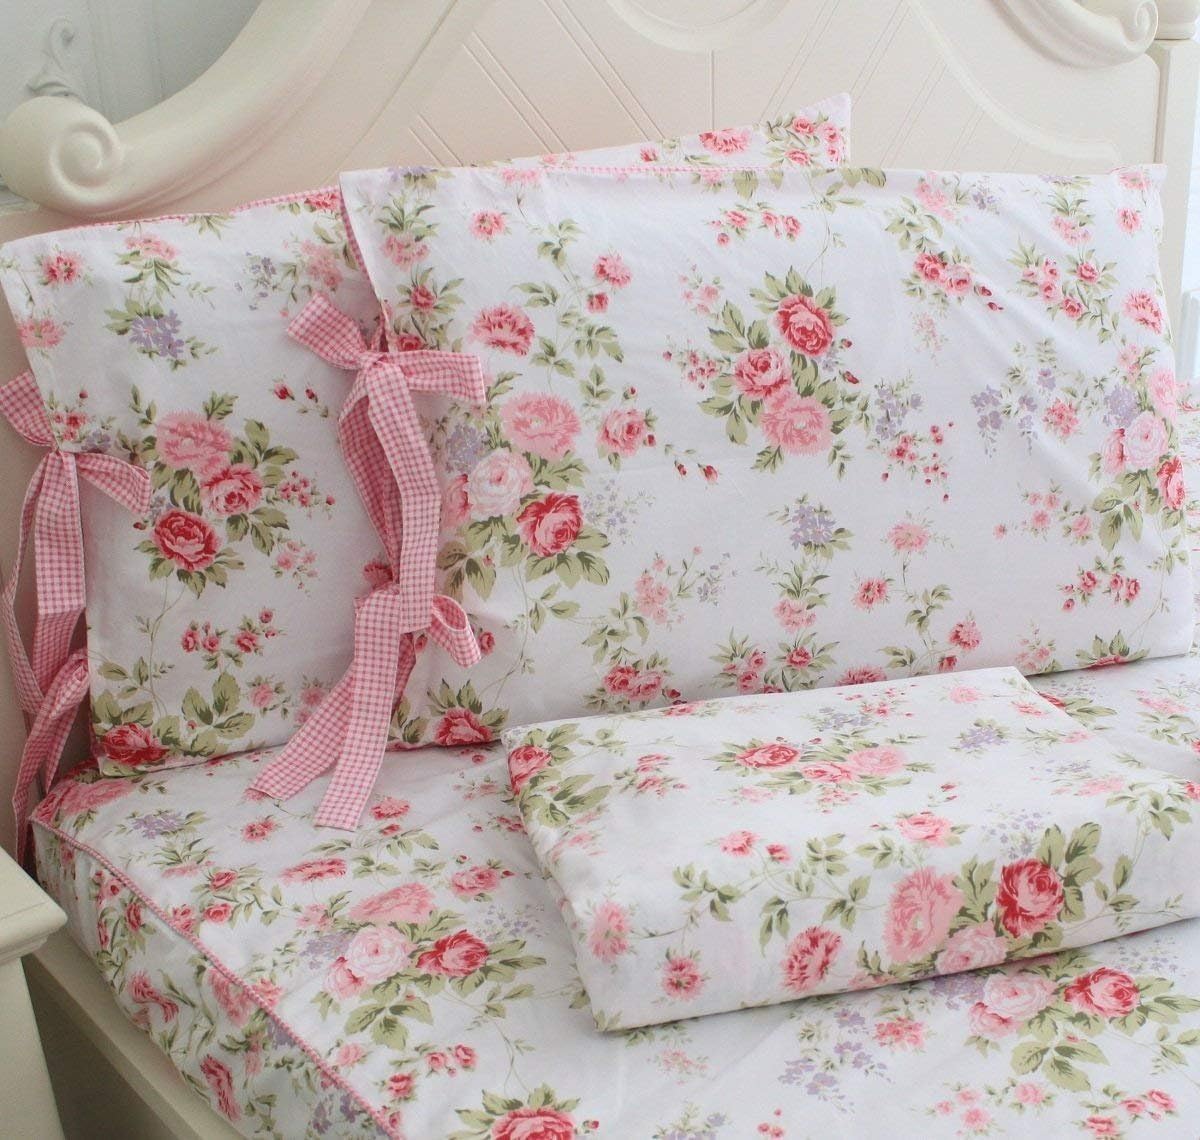 A set of girls bunk beds with floral-patterned sheets and pillows decorated with pink and red flowers. The pillows have pink checkered ties on the sides.